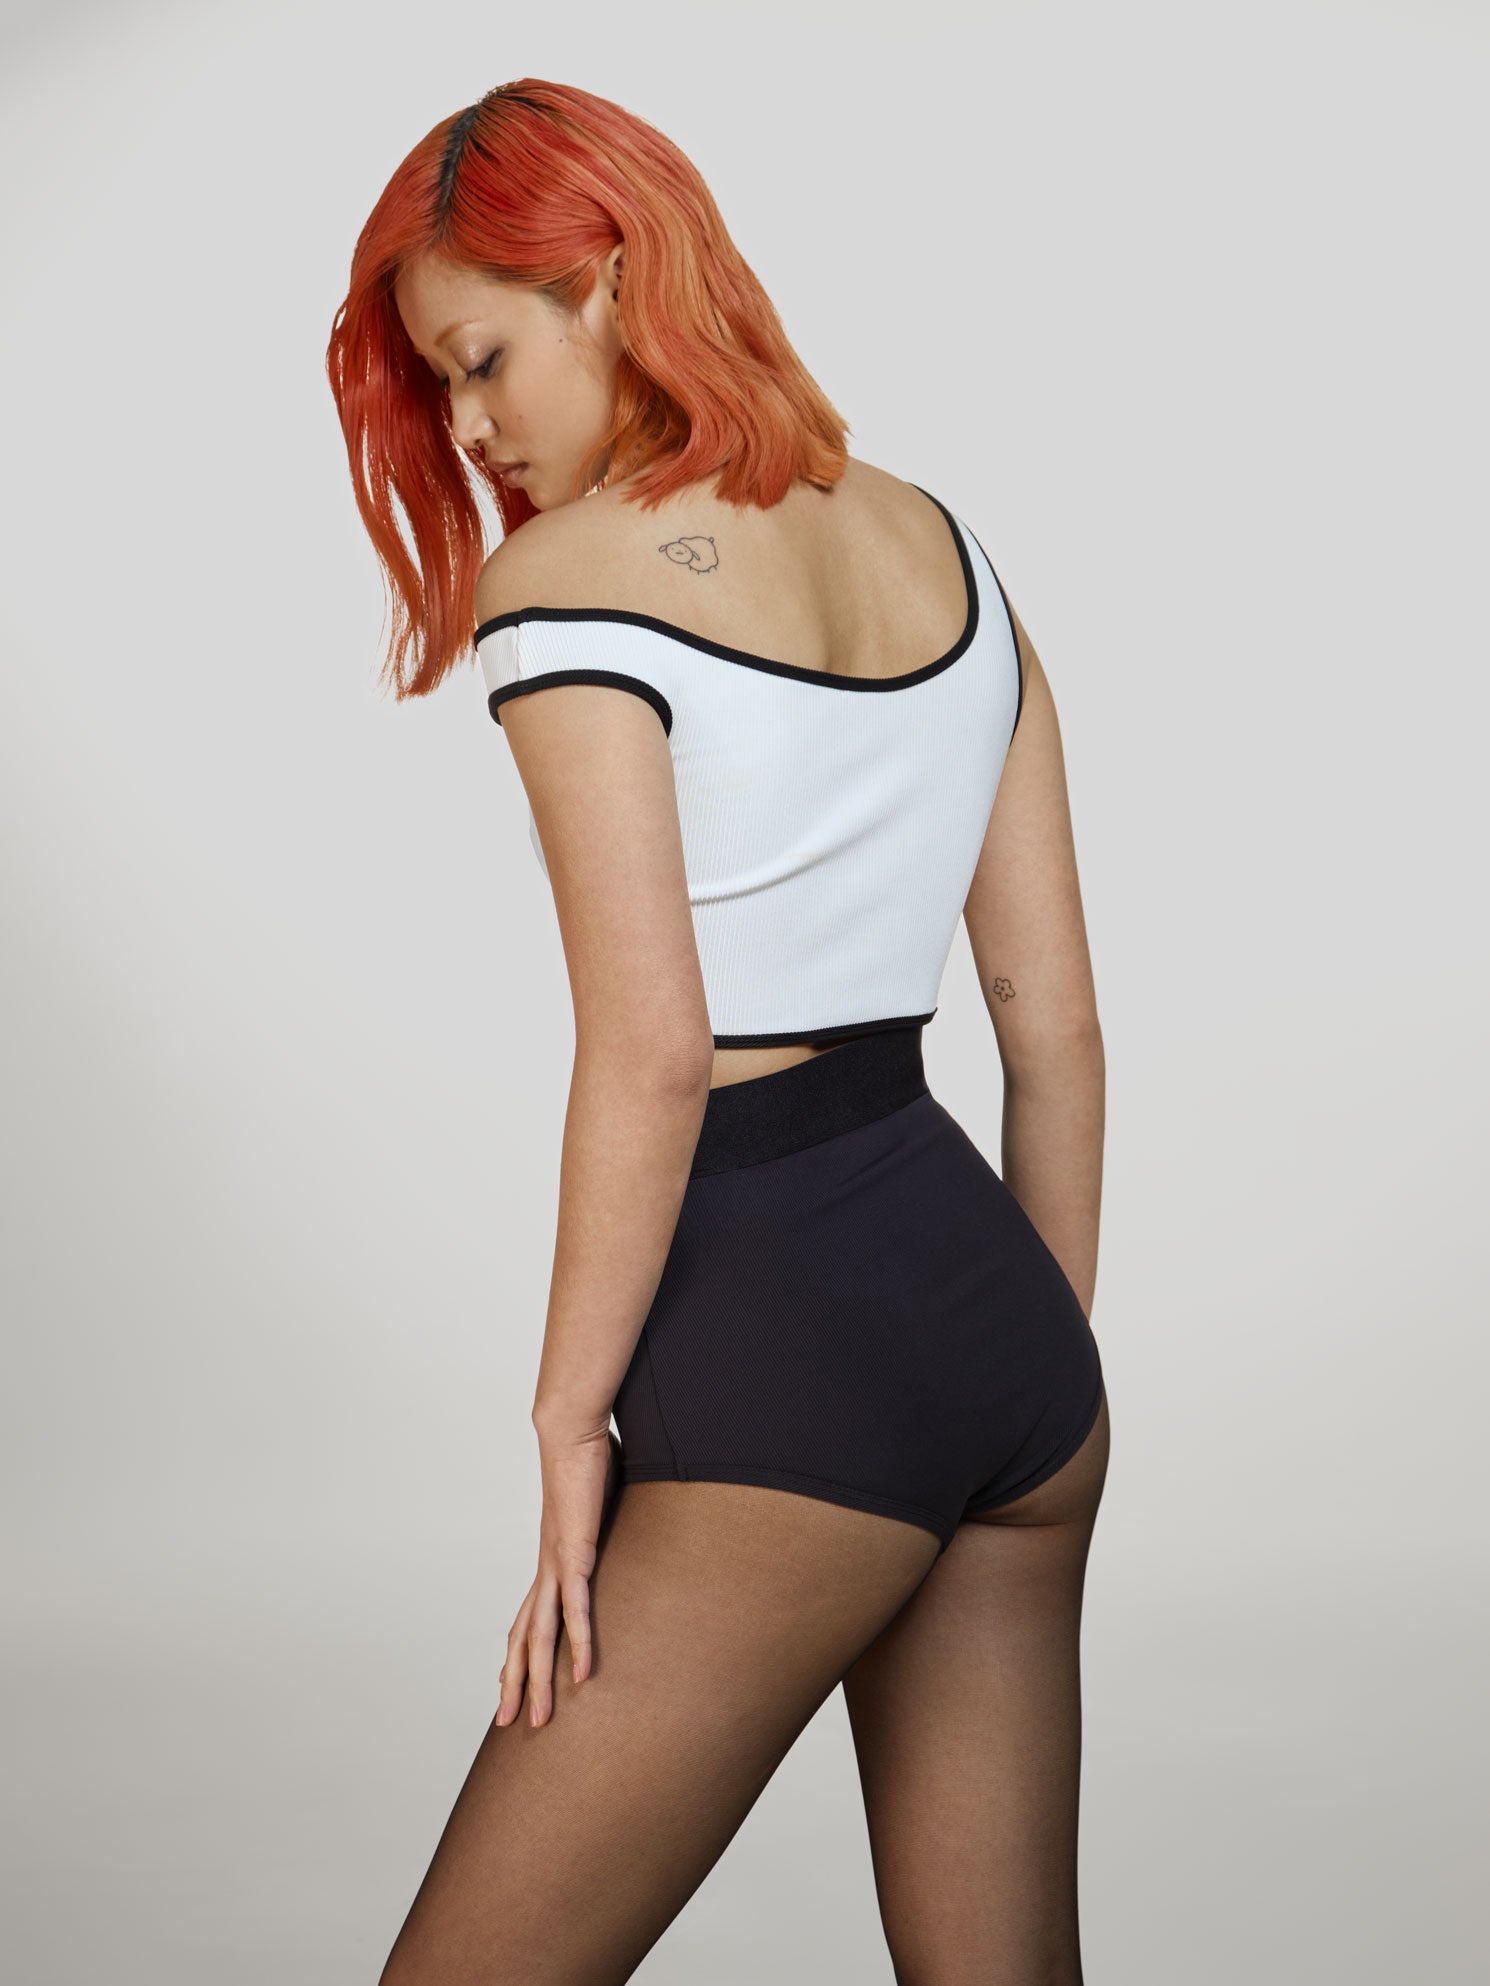 Medium full shot of a girl facing back in a white viscose crop top, black viscose briefs with high rise and black sheer tights